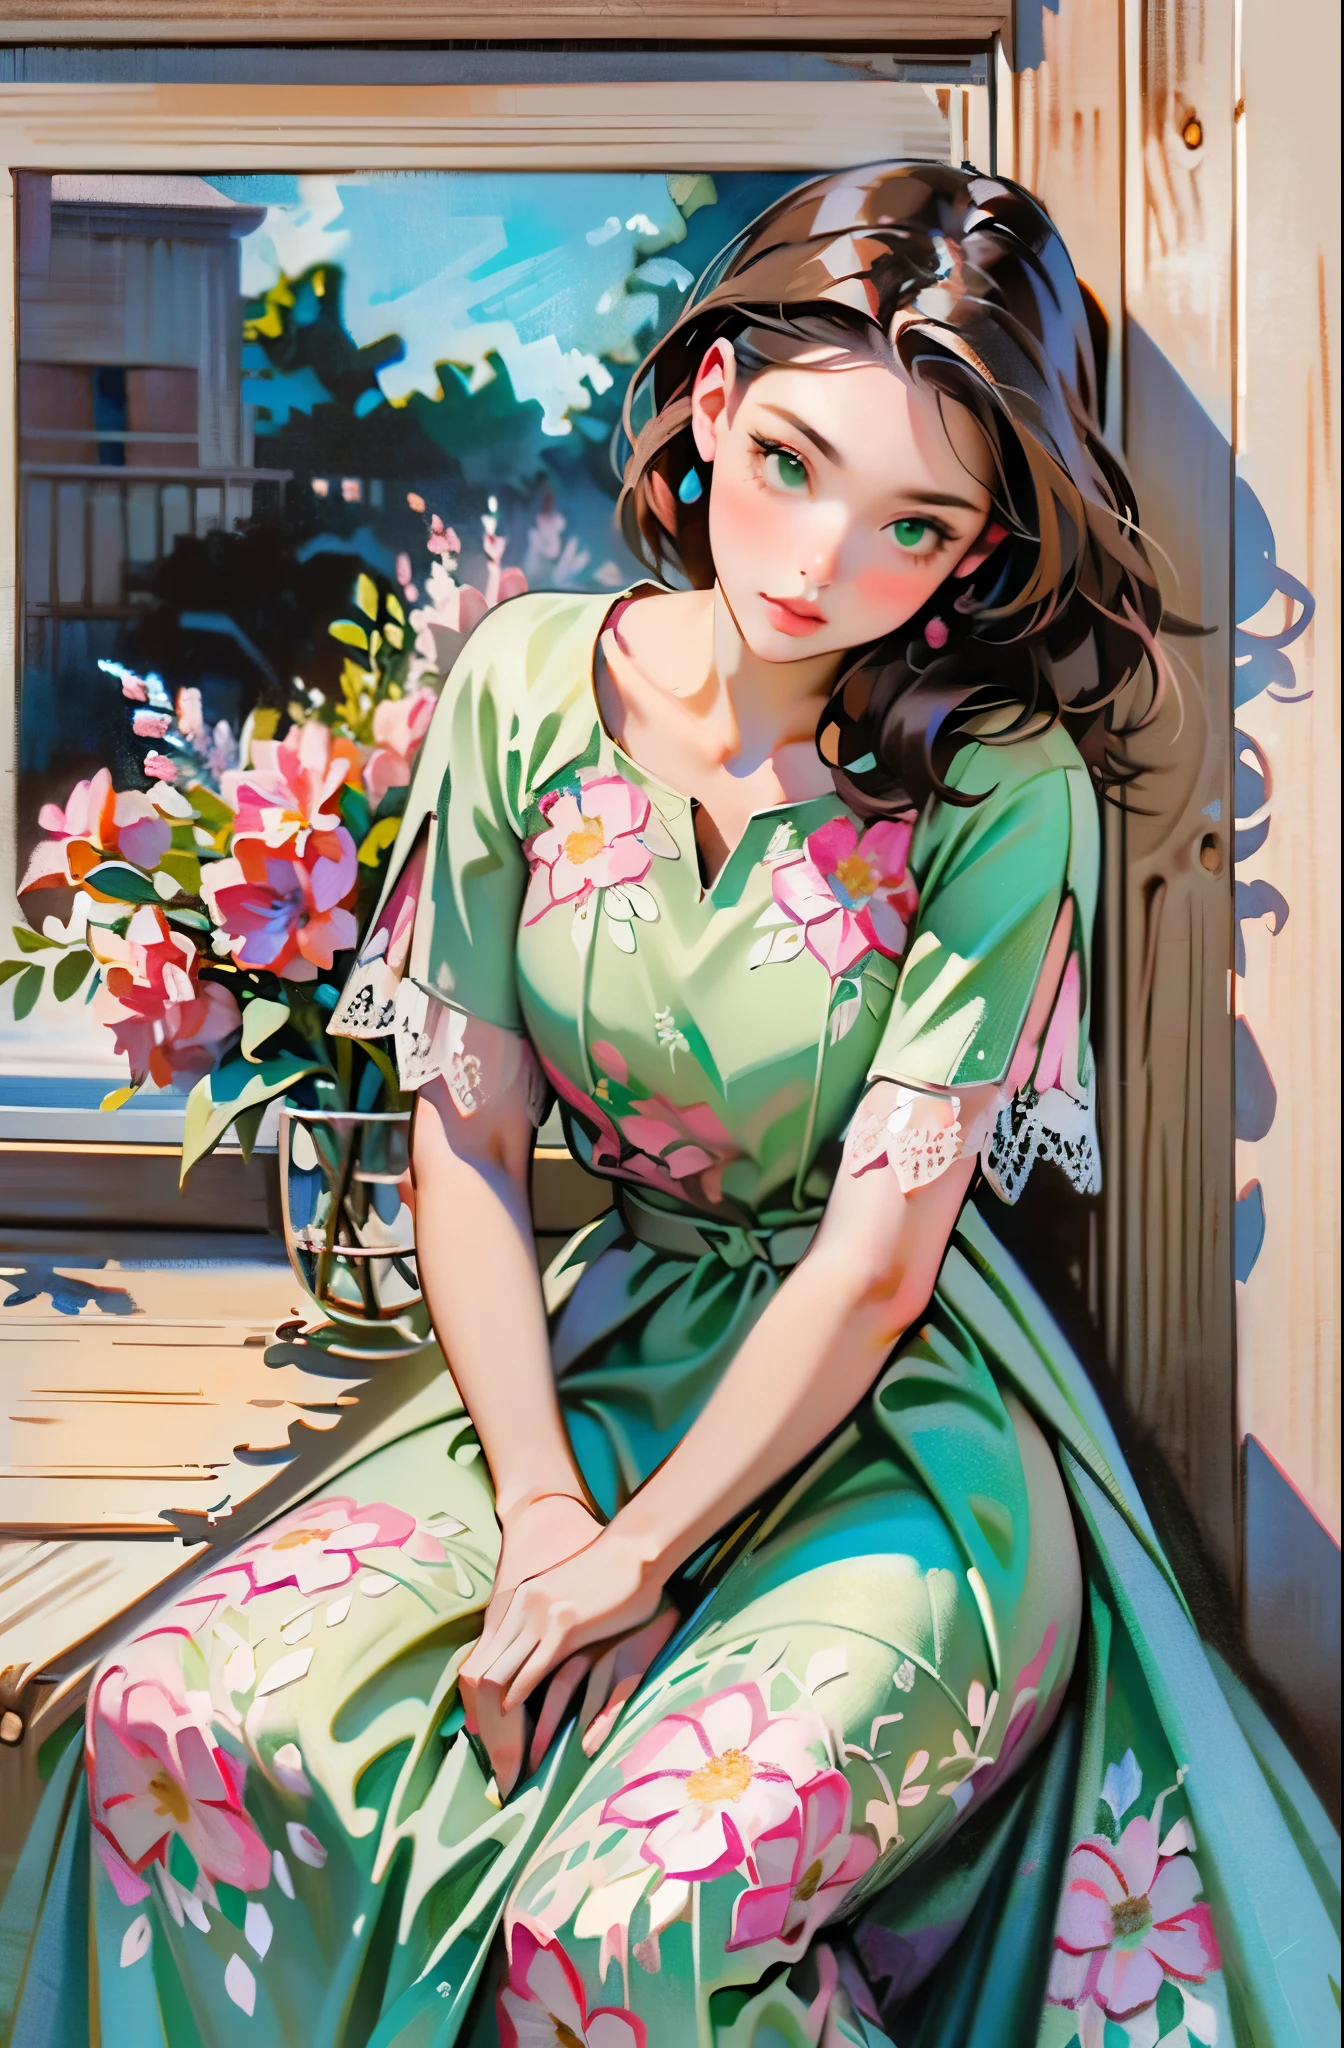 (Impressionismus1:1.0) soft pastel palette (Weiß, Rosa, Rot, Grün, braun) Aquarell (pensive pretty Young woman long braun hair in a floral print dress lace edges 1.0) (sitting on a stone door step leaning against an old braun wooden door 1.0).